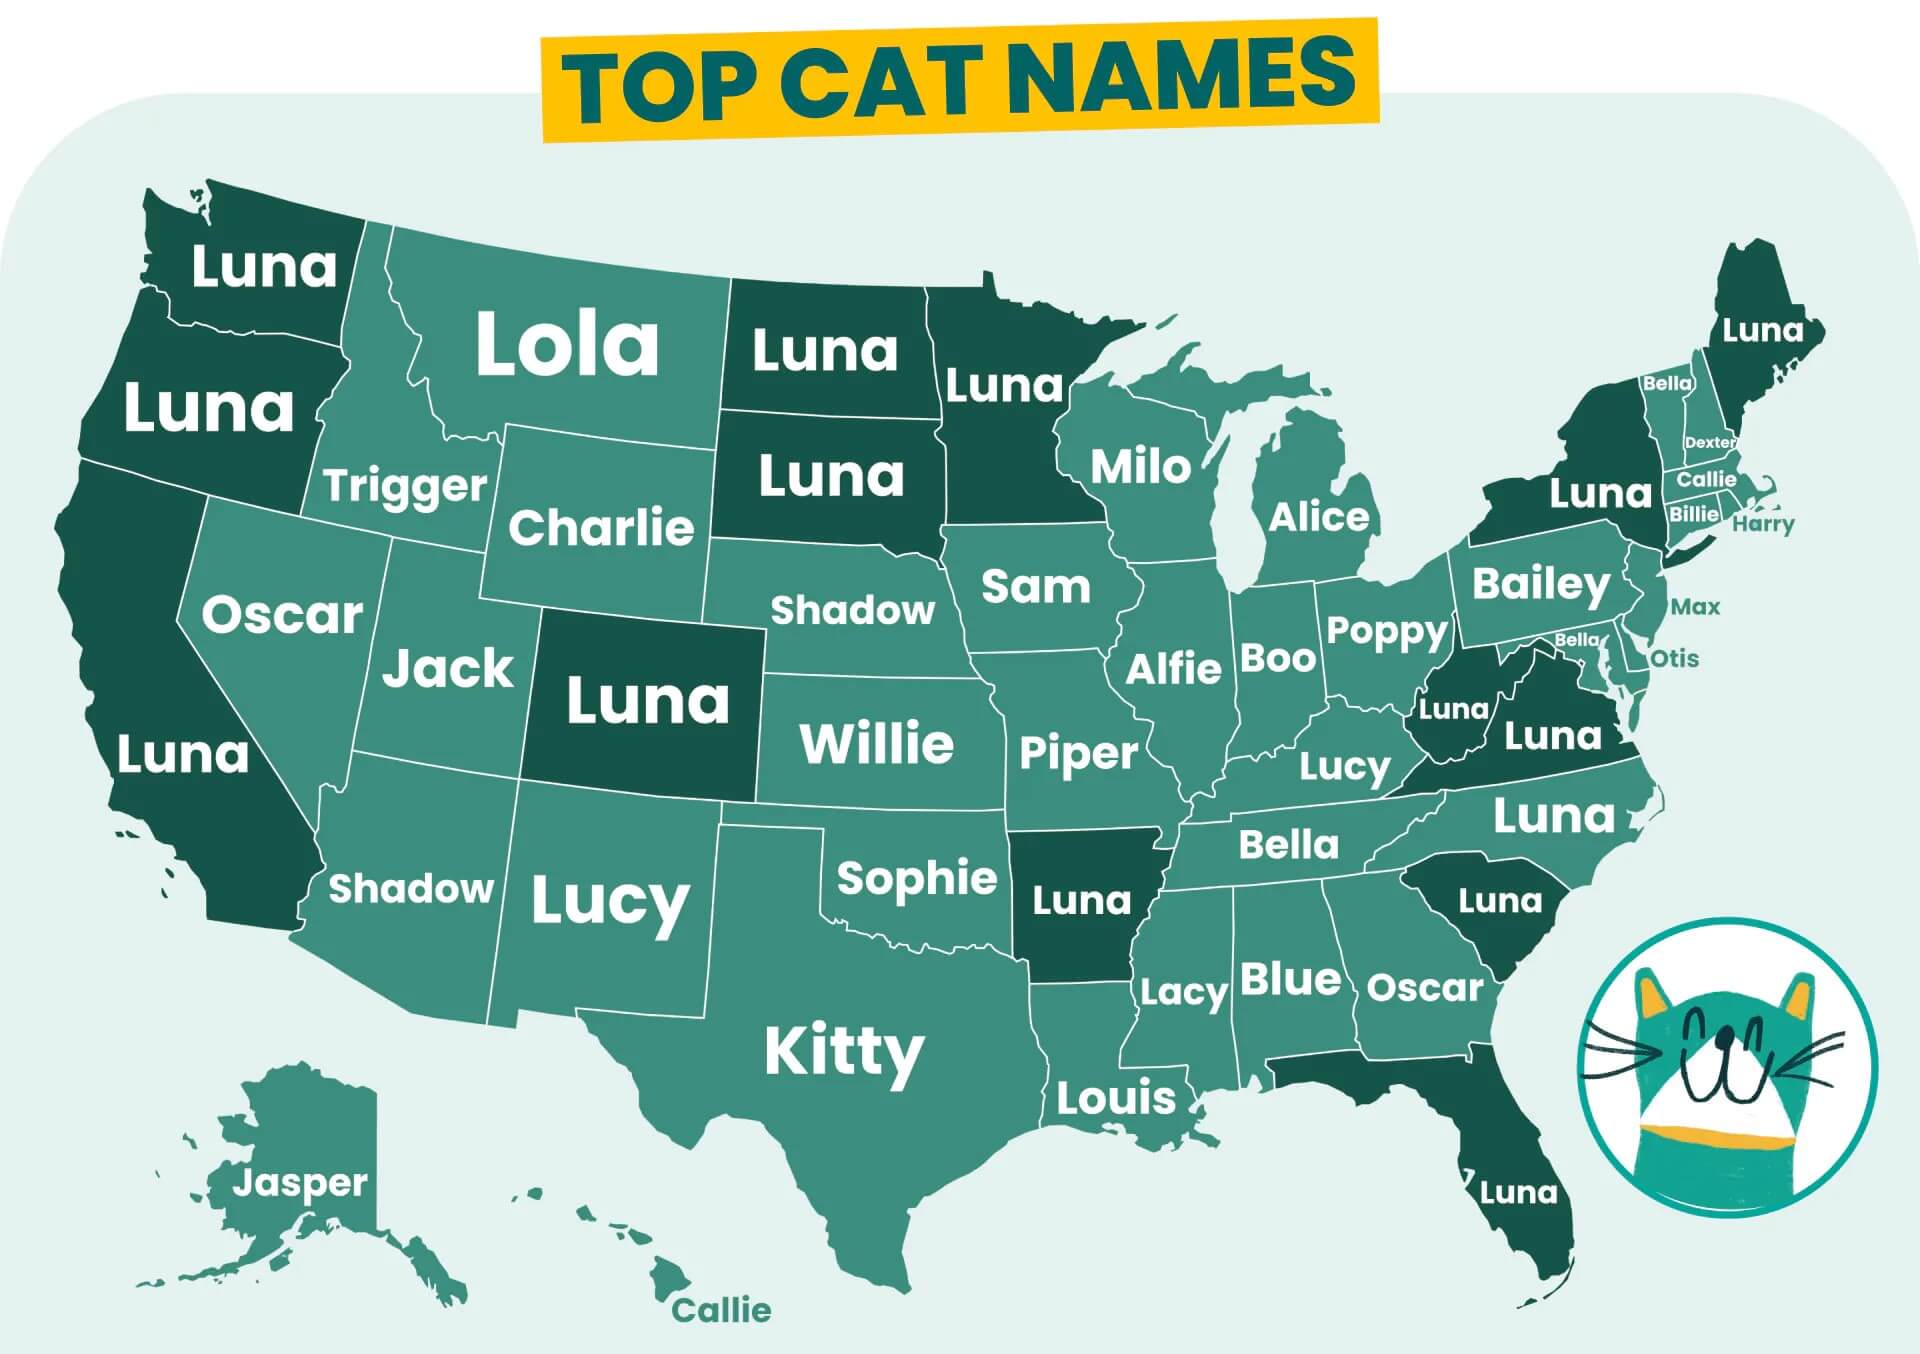 Cat names by state